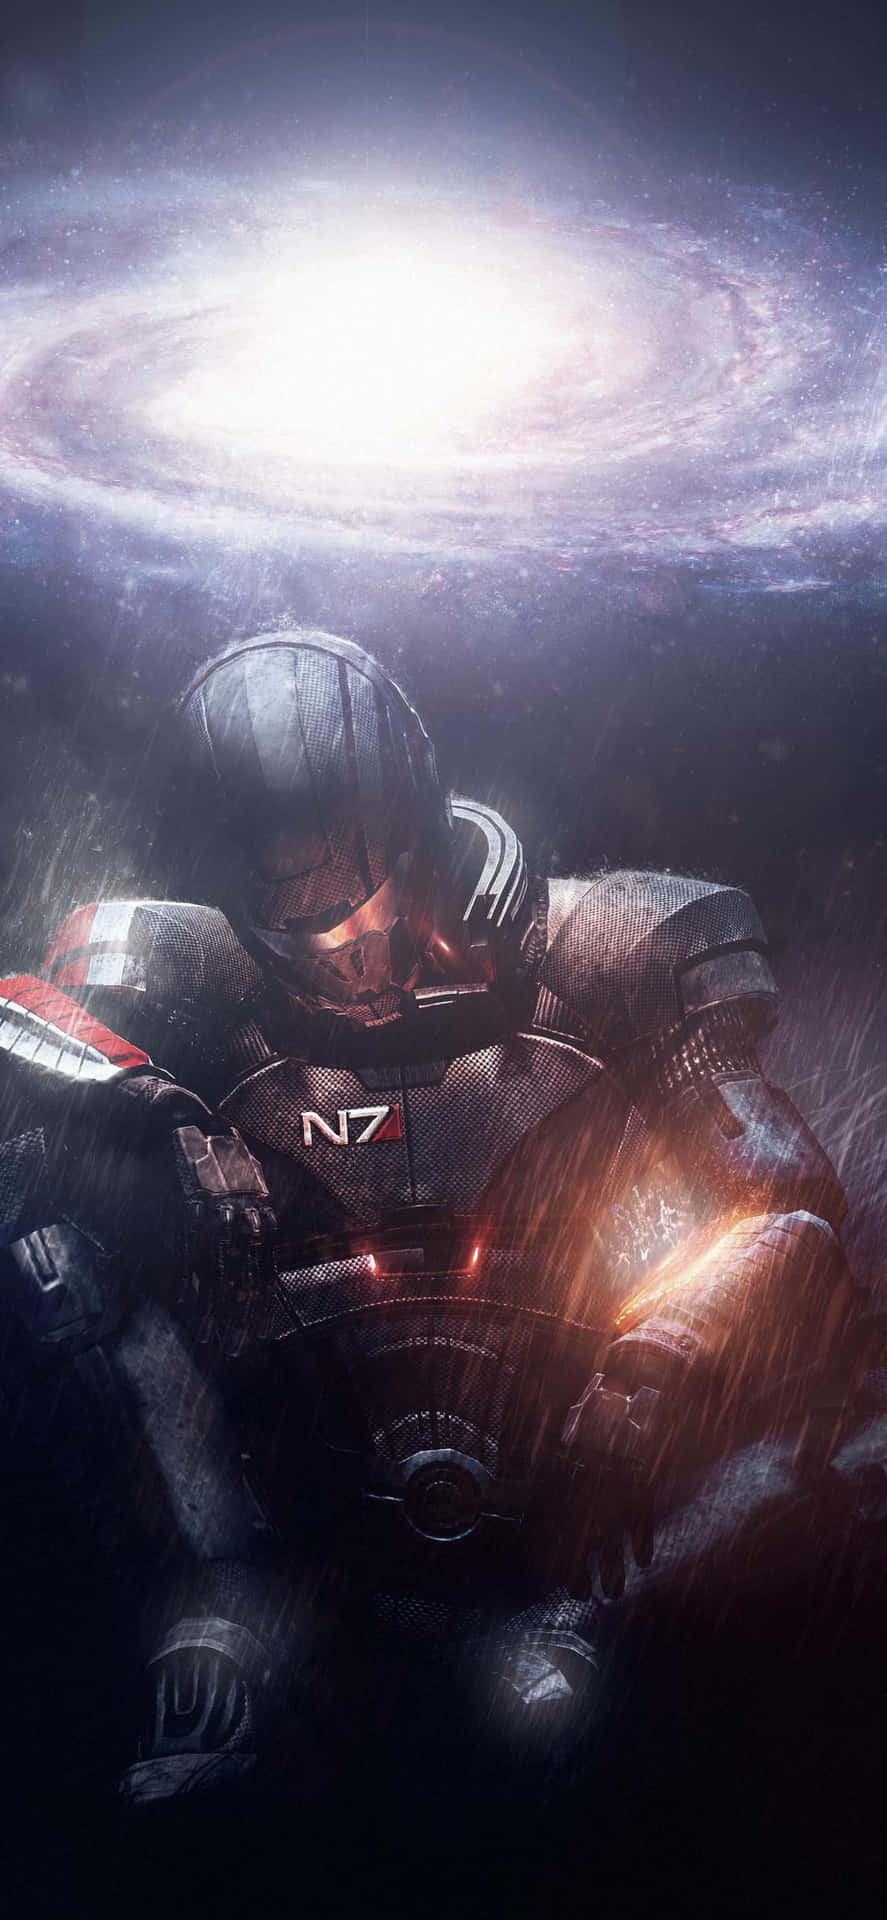 Heroes Unite in the Mass Effect Trilogy Wallpaper